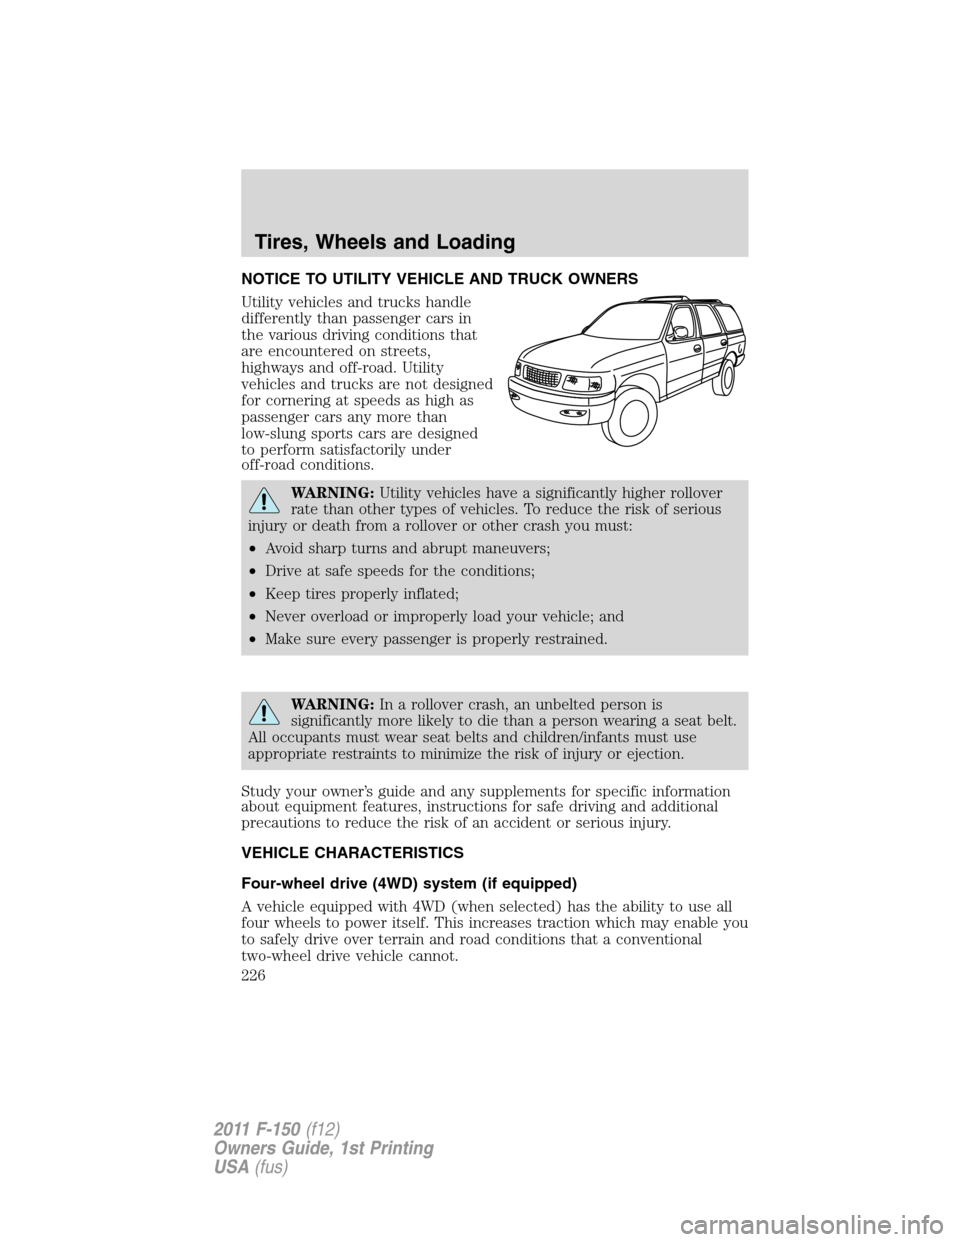 FORD F150 2011 12.G Owners Manual NOTICE TO UTILITY VEHICLE AND TRUCK OWNERS
Utility vehicles and trucks handle
differently than passenger cars in
the various driving conditions that
are encountered on streets,
highways and off-road. 